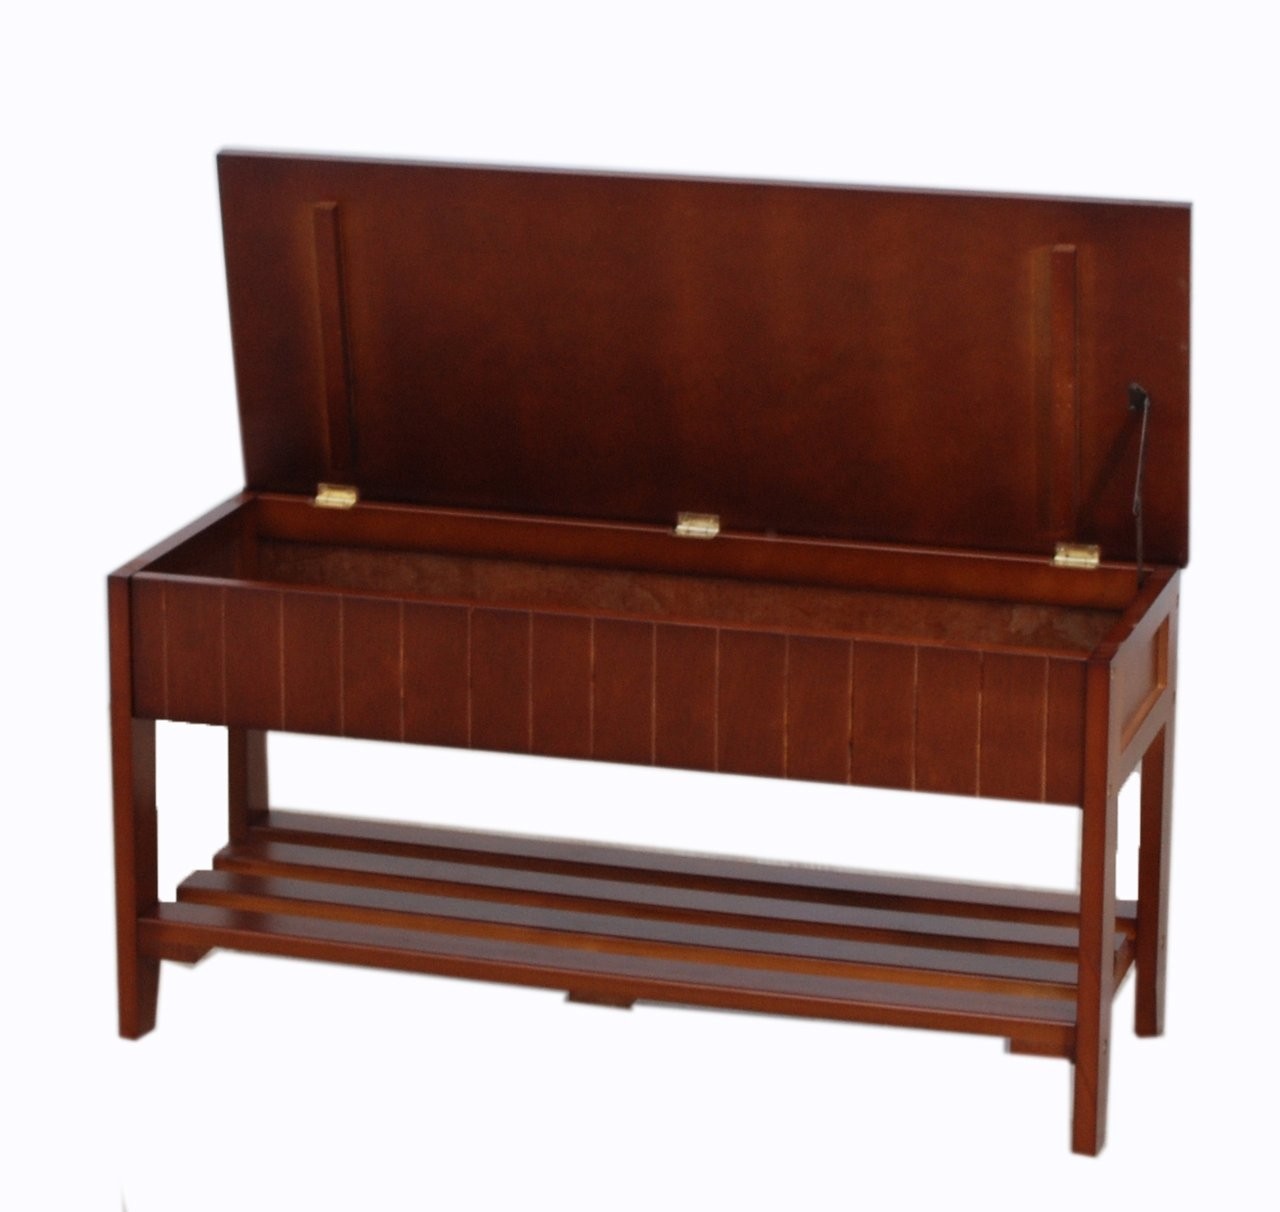 Roundhill furniture quality solid wood shoe bench with 1